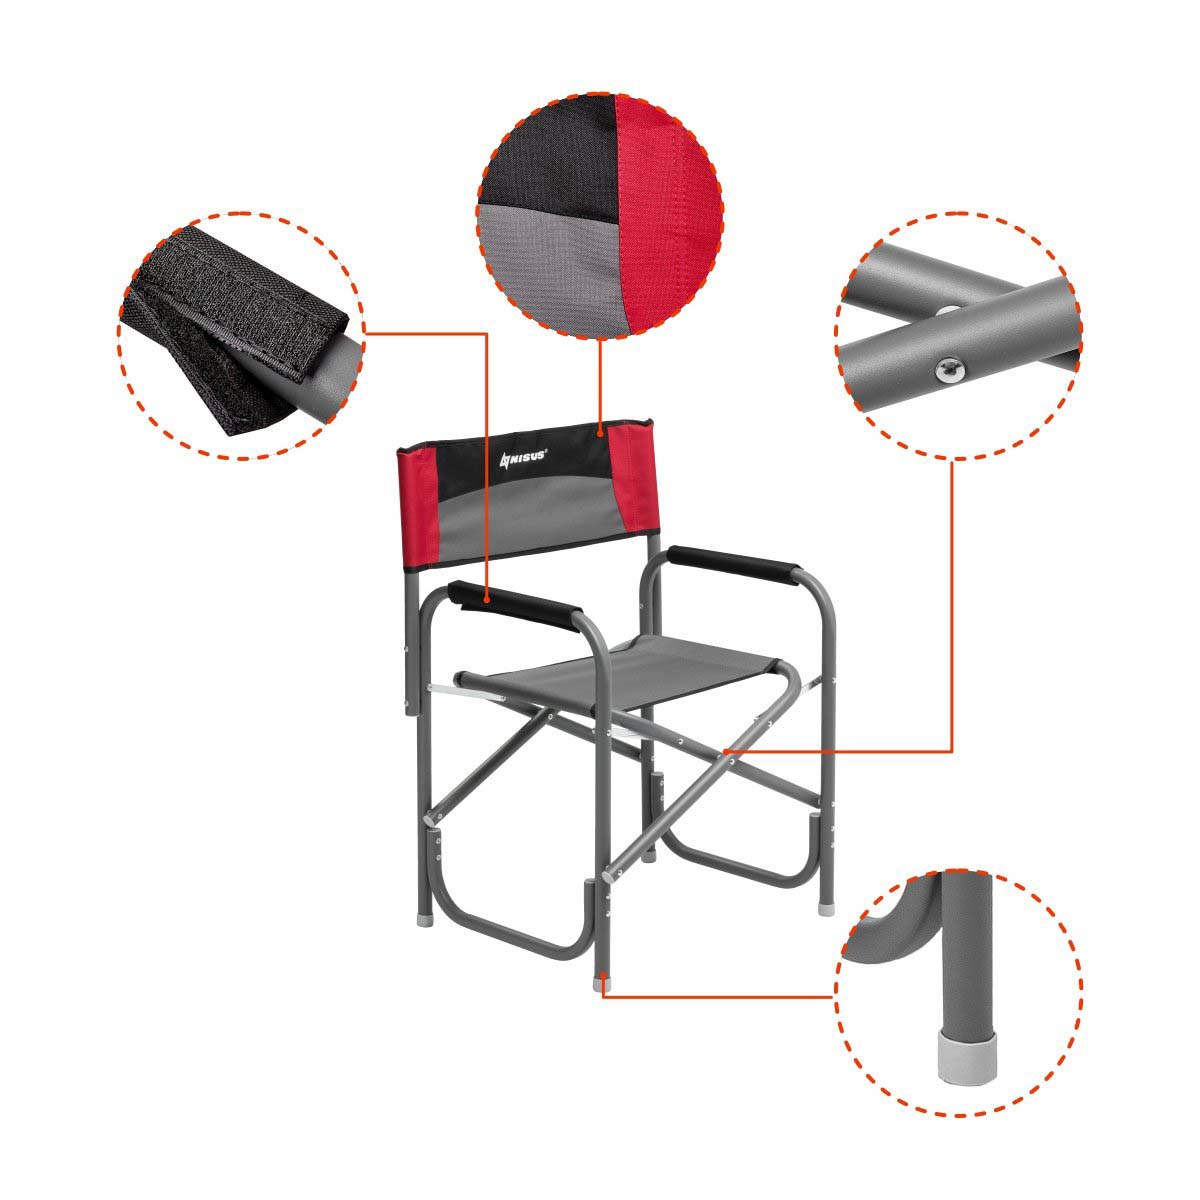 Portable Aluminum Folding Director's Chair for Camping